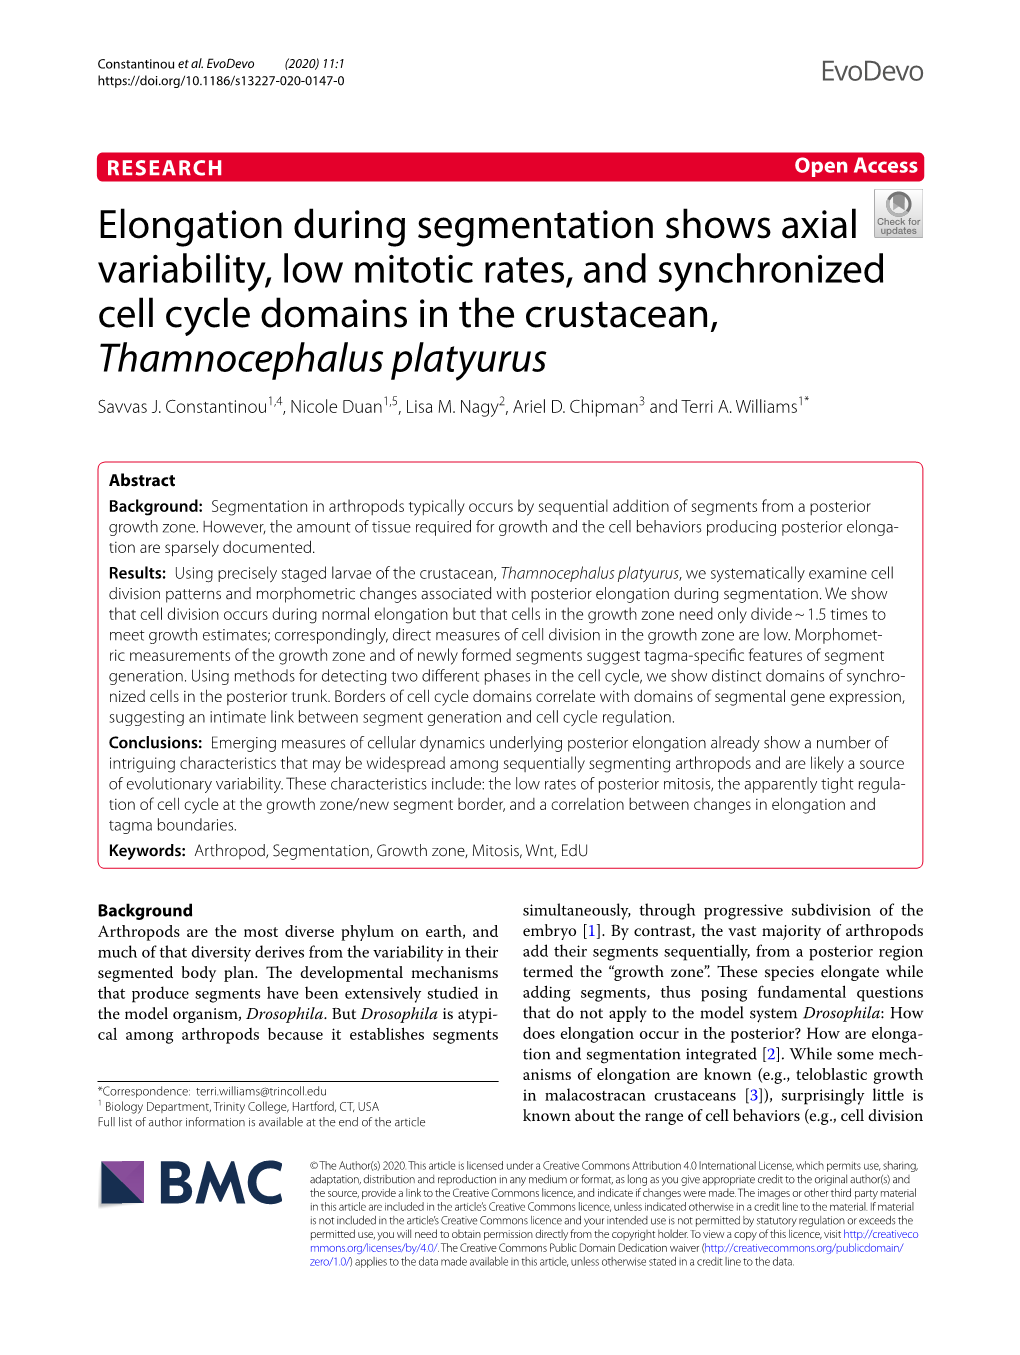 Elongation During Segmentation Shows Axial Variability, Low Mitotic Rates, and Synchronized Cell Cycle Domains in the Crustacean, Thamnocephalus Platyurus Savvas J